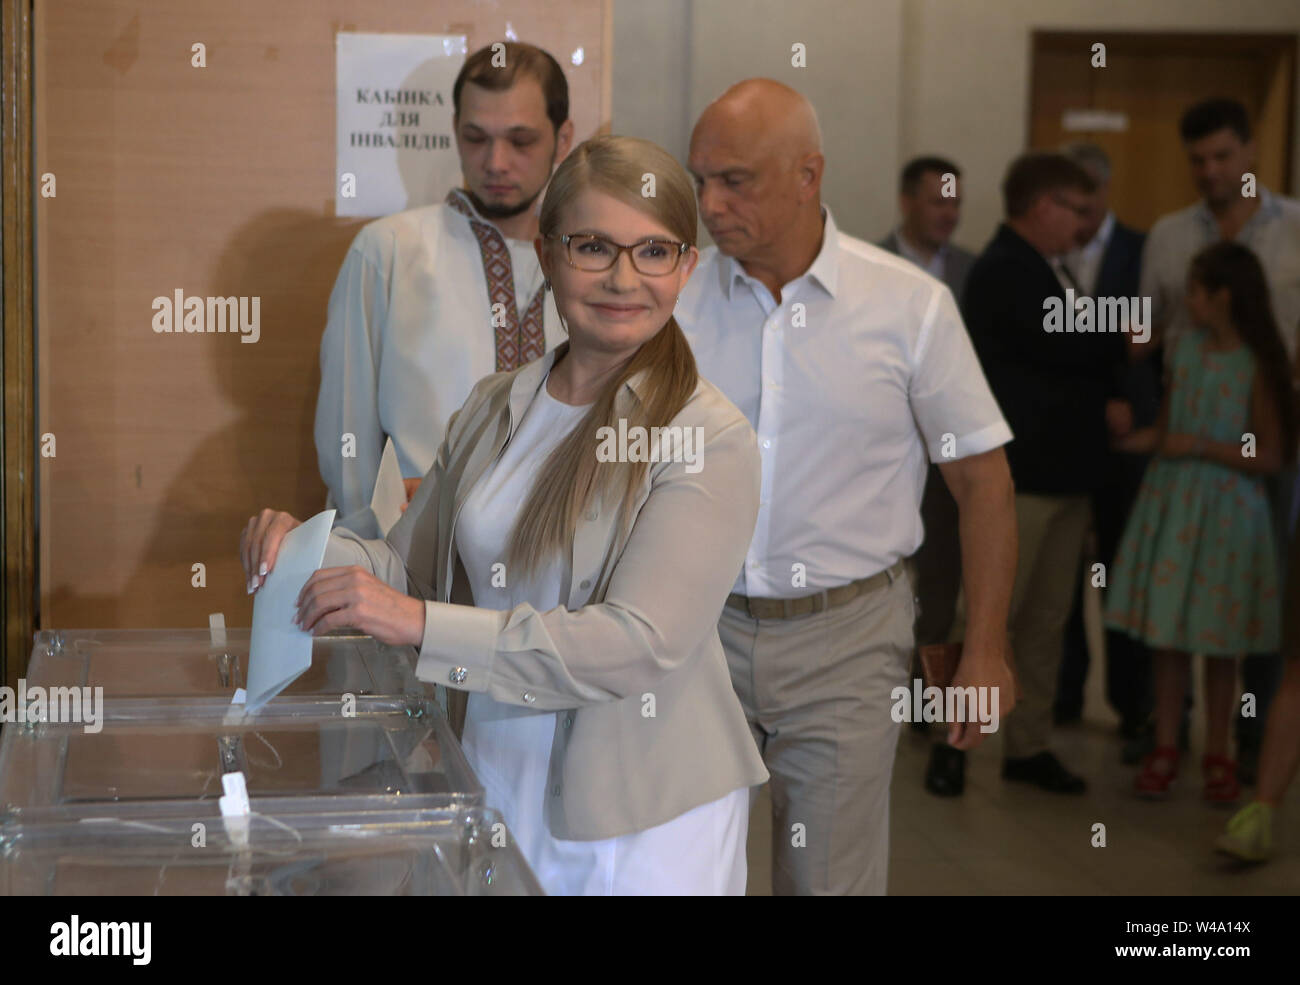 Kiev, Ukraine. 21st July, 2019. Ukrainian politician Yulia Tymoshenko, leader of the Fatherland party, casts her ballot at a polling station in Kiev, Ukraine, on July 21, 2019. Ukraine held snap parliamentary elections on Sunday. The elections were originally scheduled for October 27 this year. Credit: Sergey/Xinhua/Alamy Live News Stock Photo